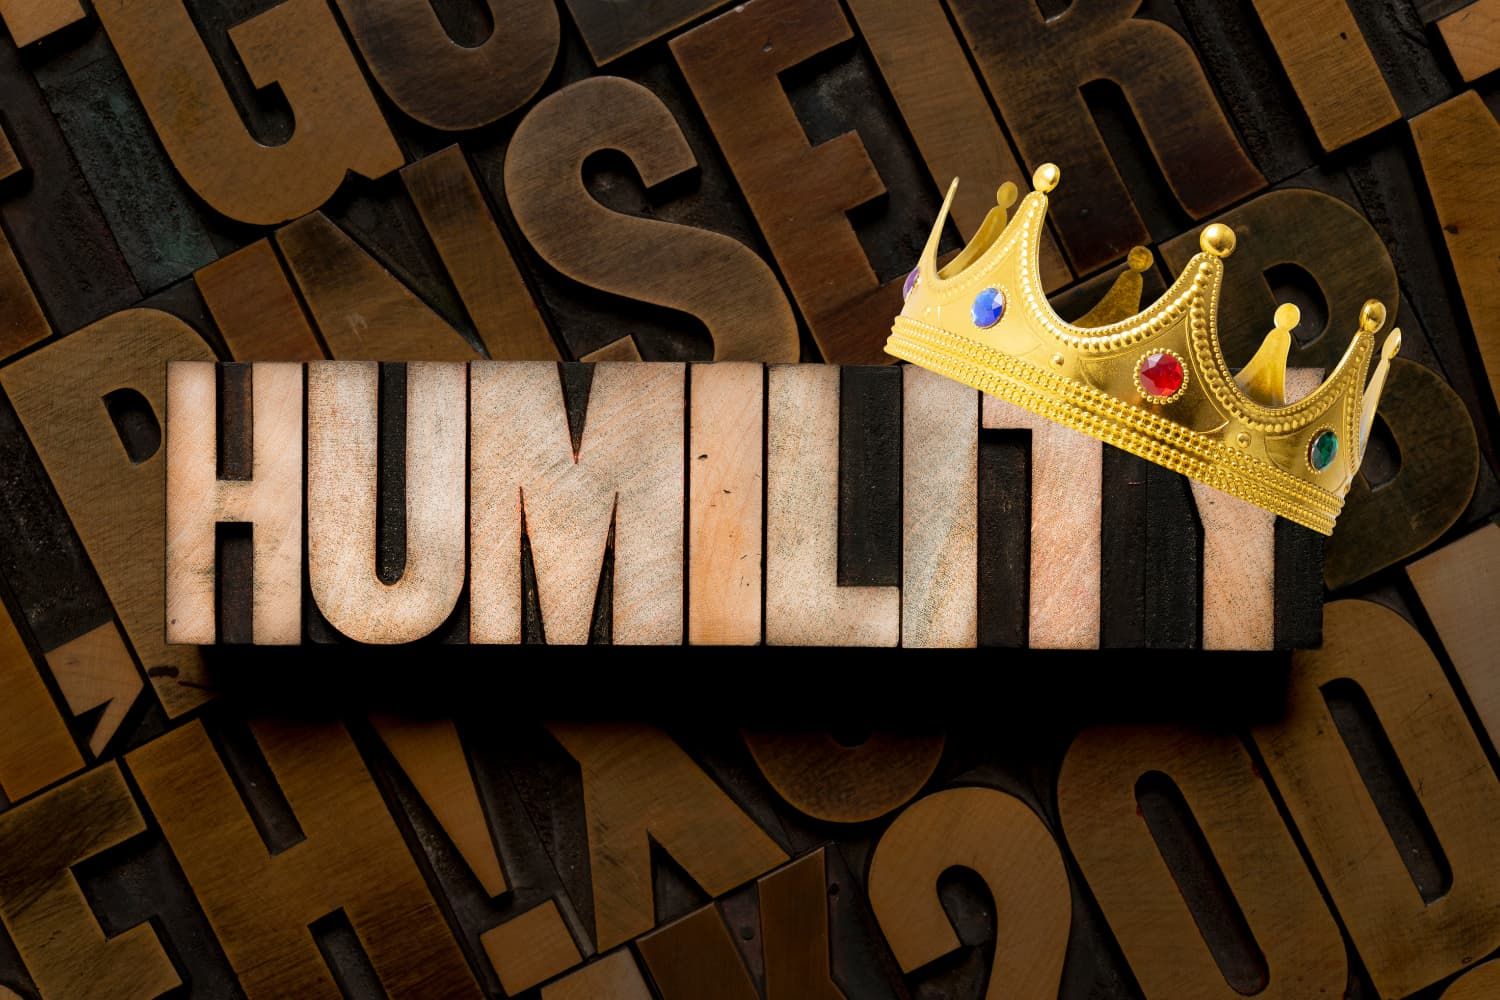 Prayer%20-%20NT%20Philippians%20-%20Crowns%20of%20humility-b83f3a0b Body of Christ / the church